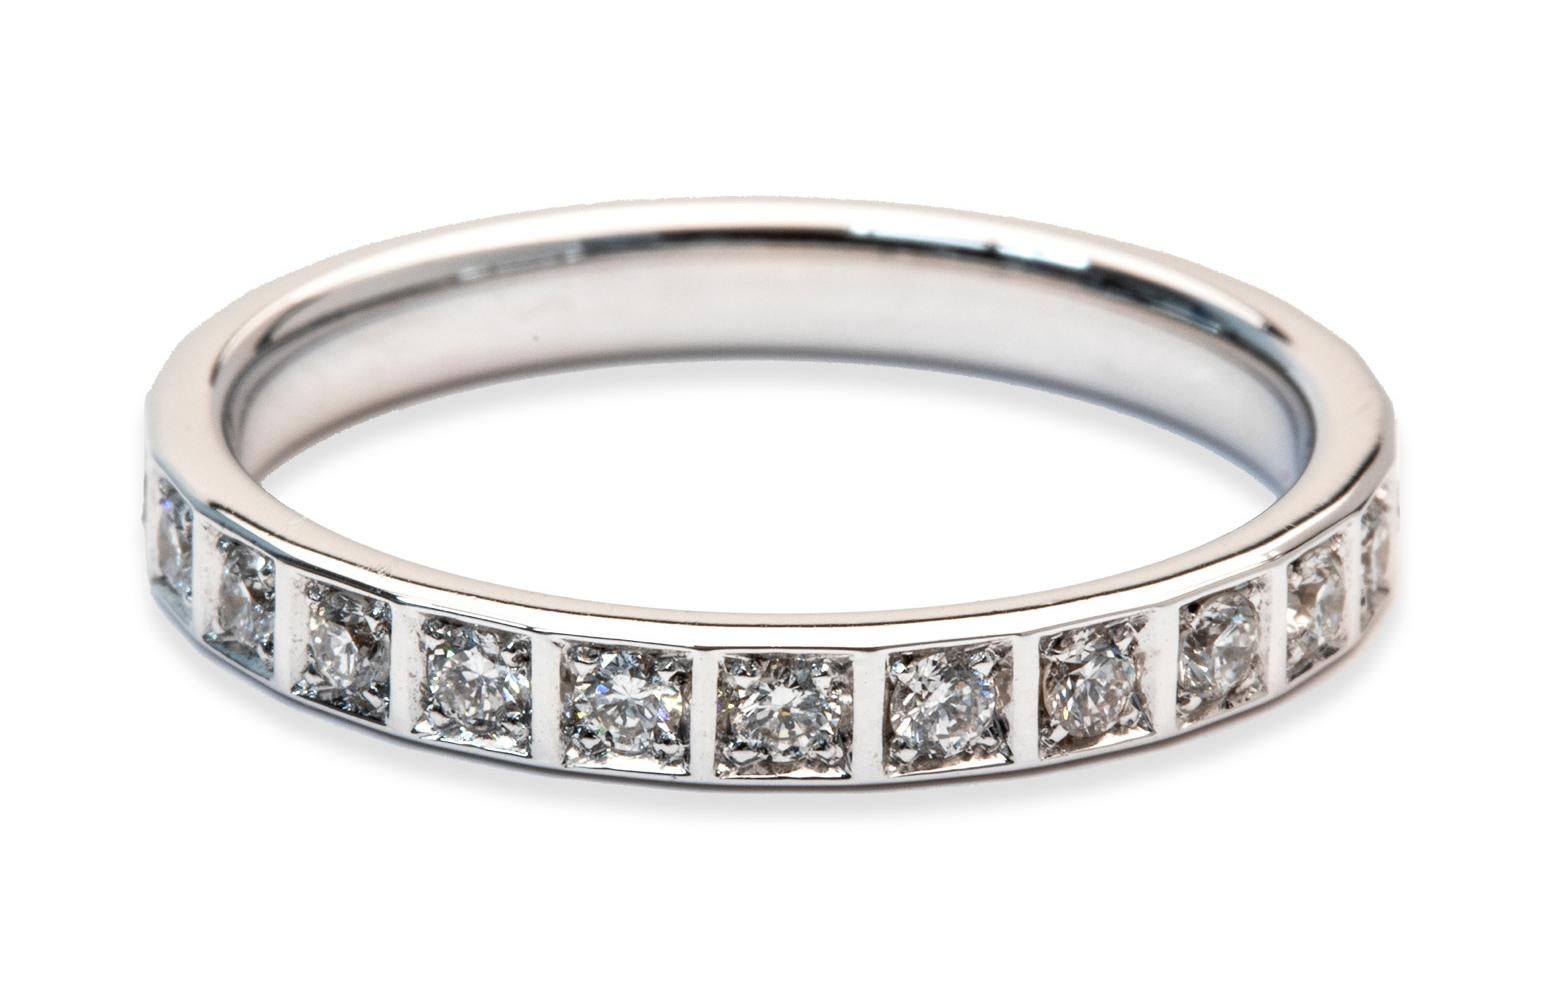 This exquisite ring, crafted in Italy, is a true testament to both artistry and sophistication. The 0.95-carat Princess Illusion Eternity Band features a captivating interplay of diamonds set in an 18K white gold band. The illusion setting creates a